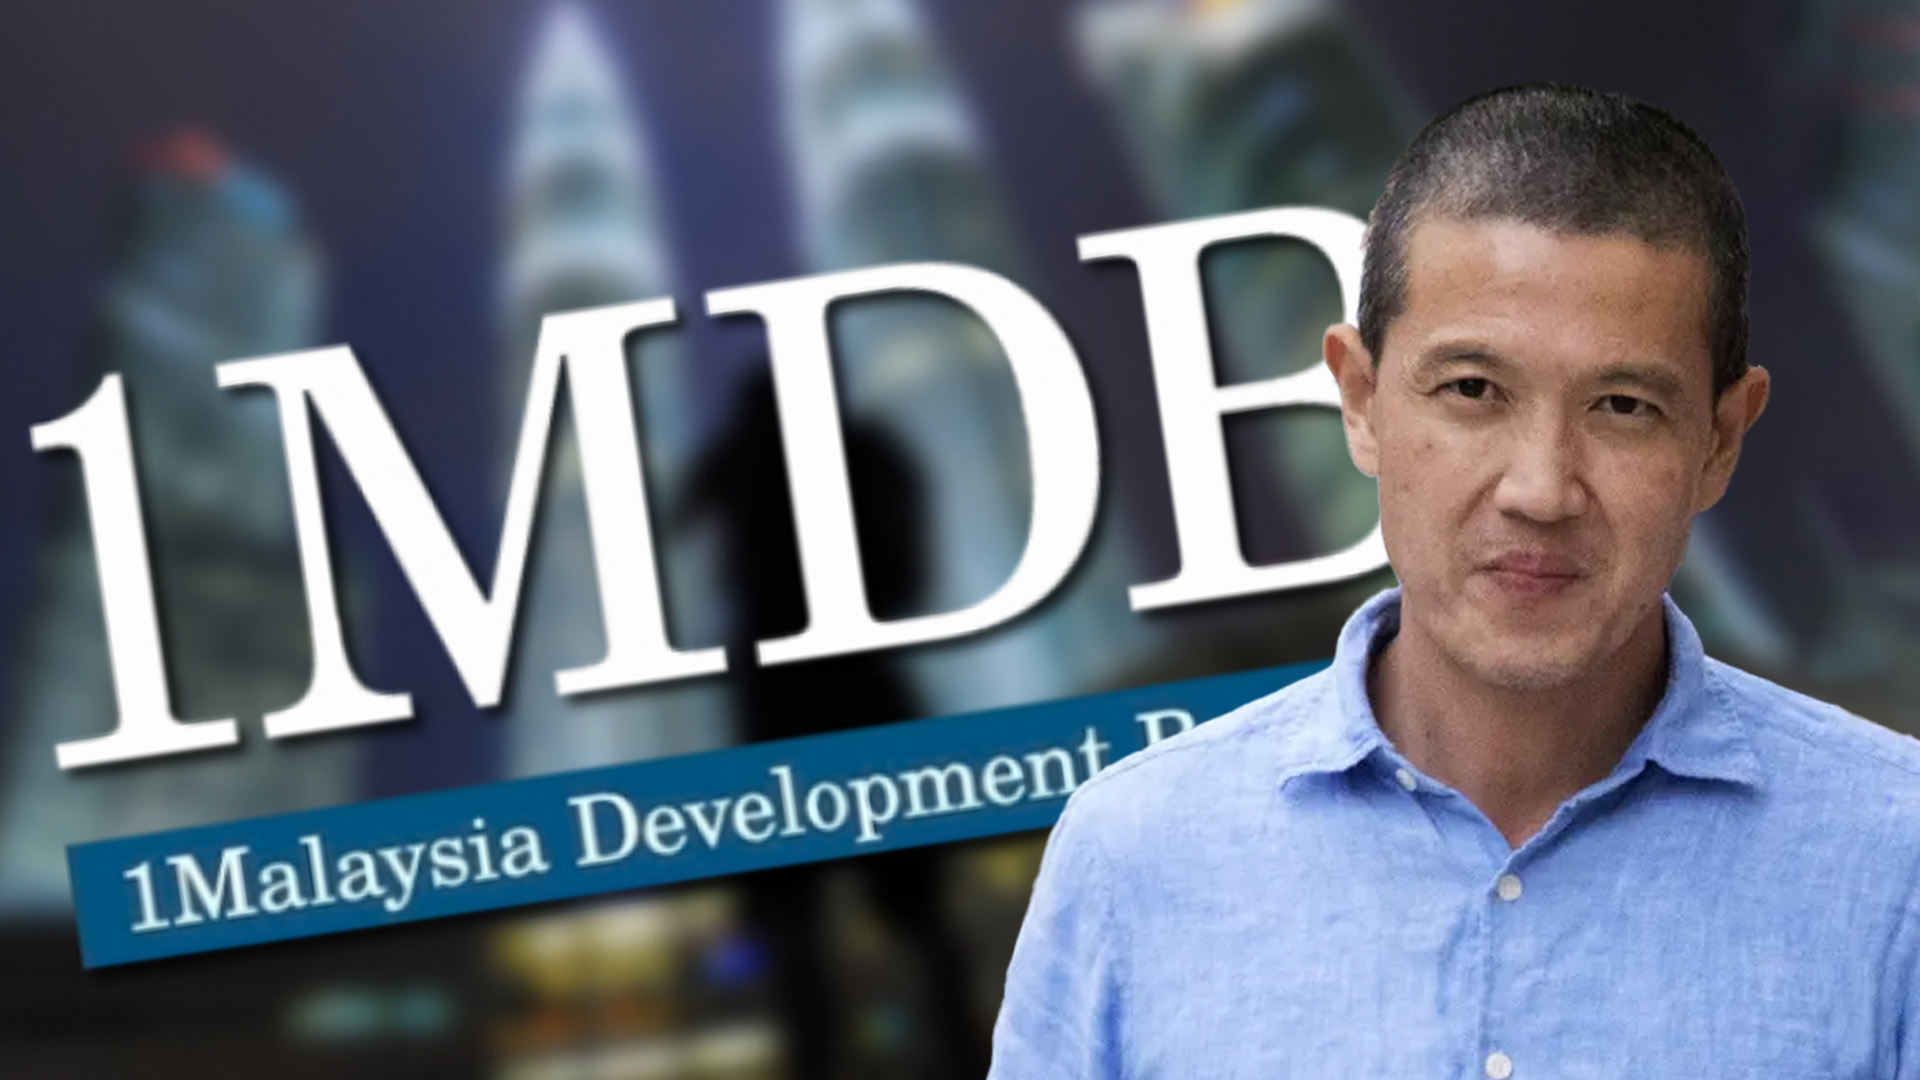 IGP confirms Roger Ng back in Malaysia for 1MDB probe